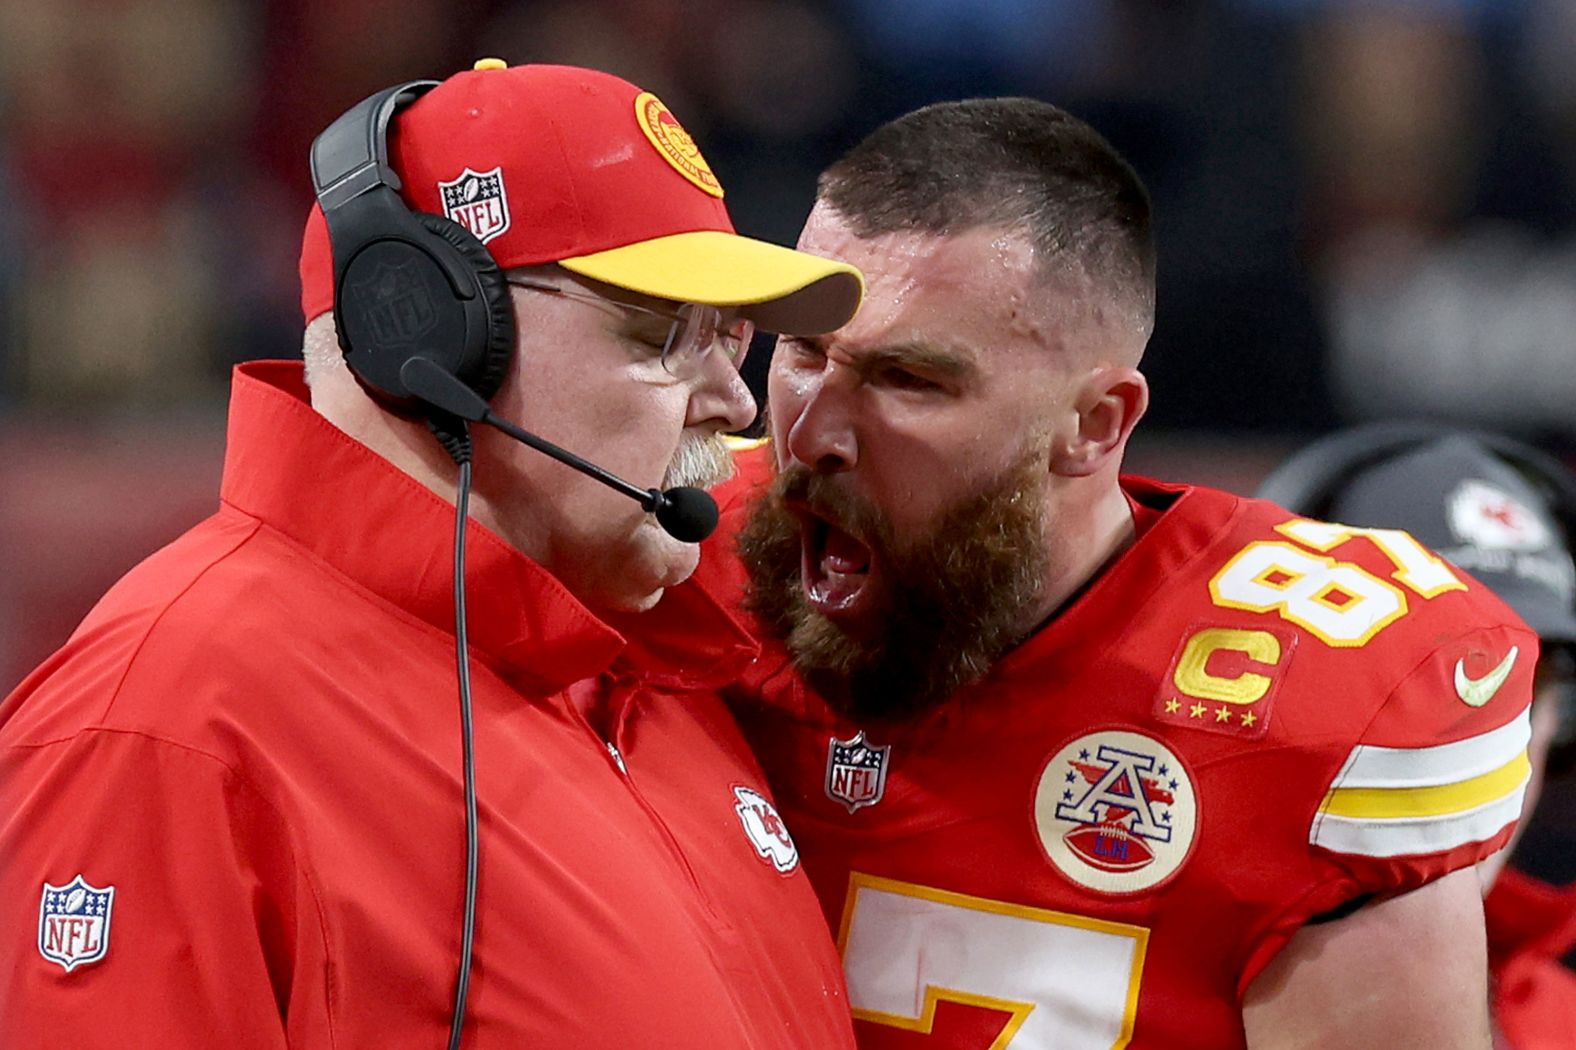 Kansas City Chiefs tight end Travis Kelce yells at head coach Andy Reid after a first-half play in Super Bowl LVIII on Sunday, February 11. Kelce also bumped into Reid, knocking him a little off balance. Reid laughed off the incident after the game, which the Chiefs won 25-22 in overtime. But Kelce said on his podcast this week that he went too far and it was "definitely unacceptable."